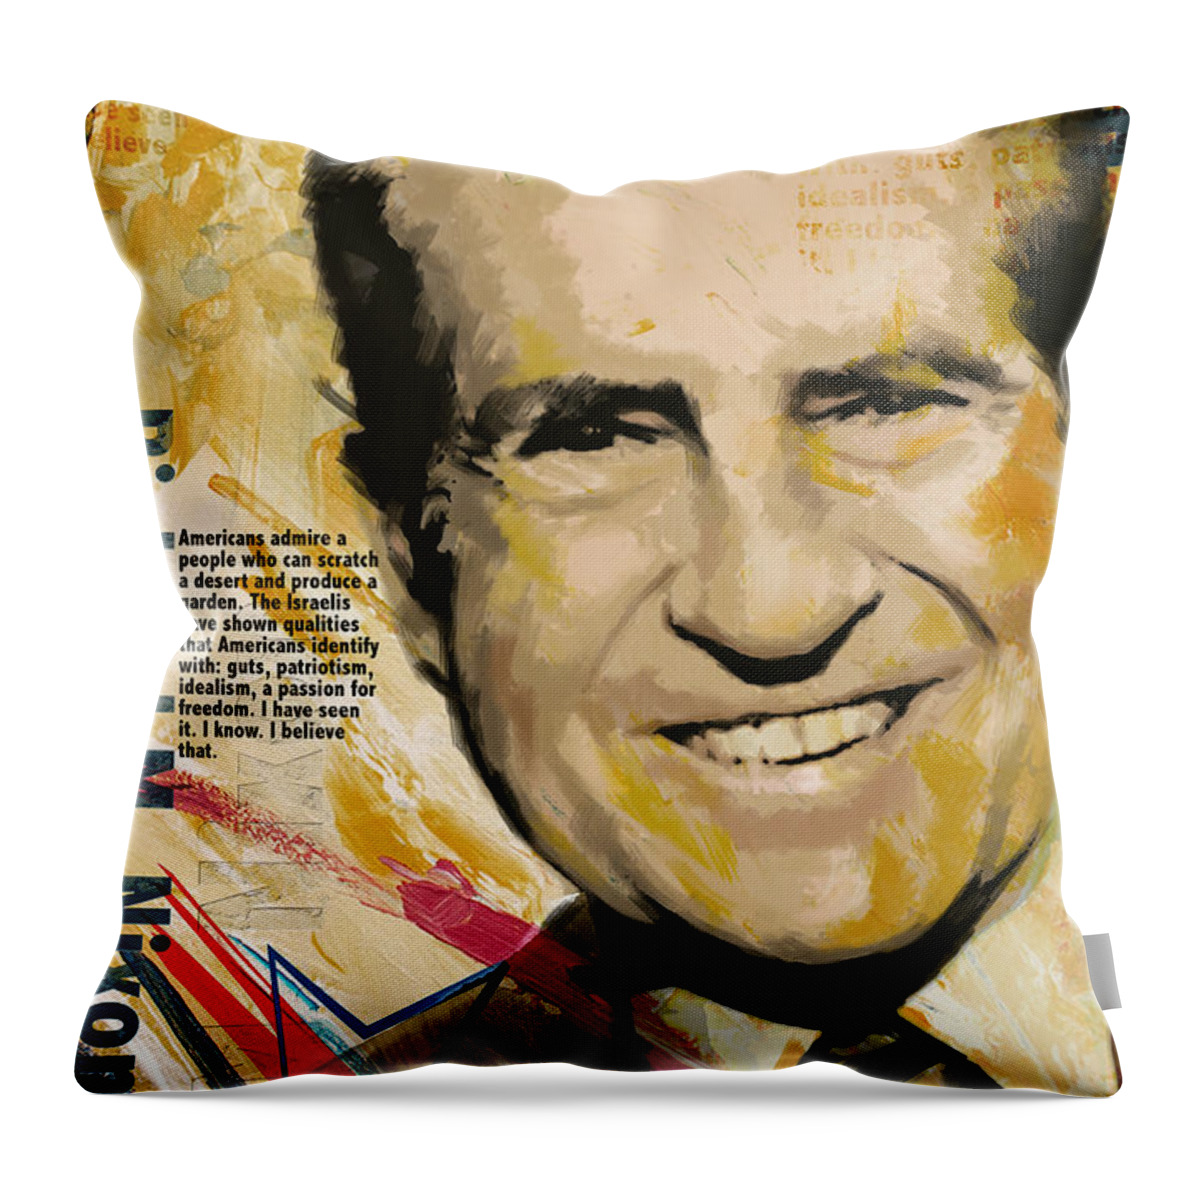 Richard Nixon Throw Pillow featuring the painting Richard Nixon by Corporate Art Task Force